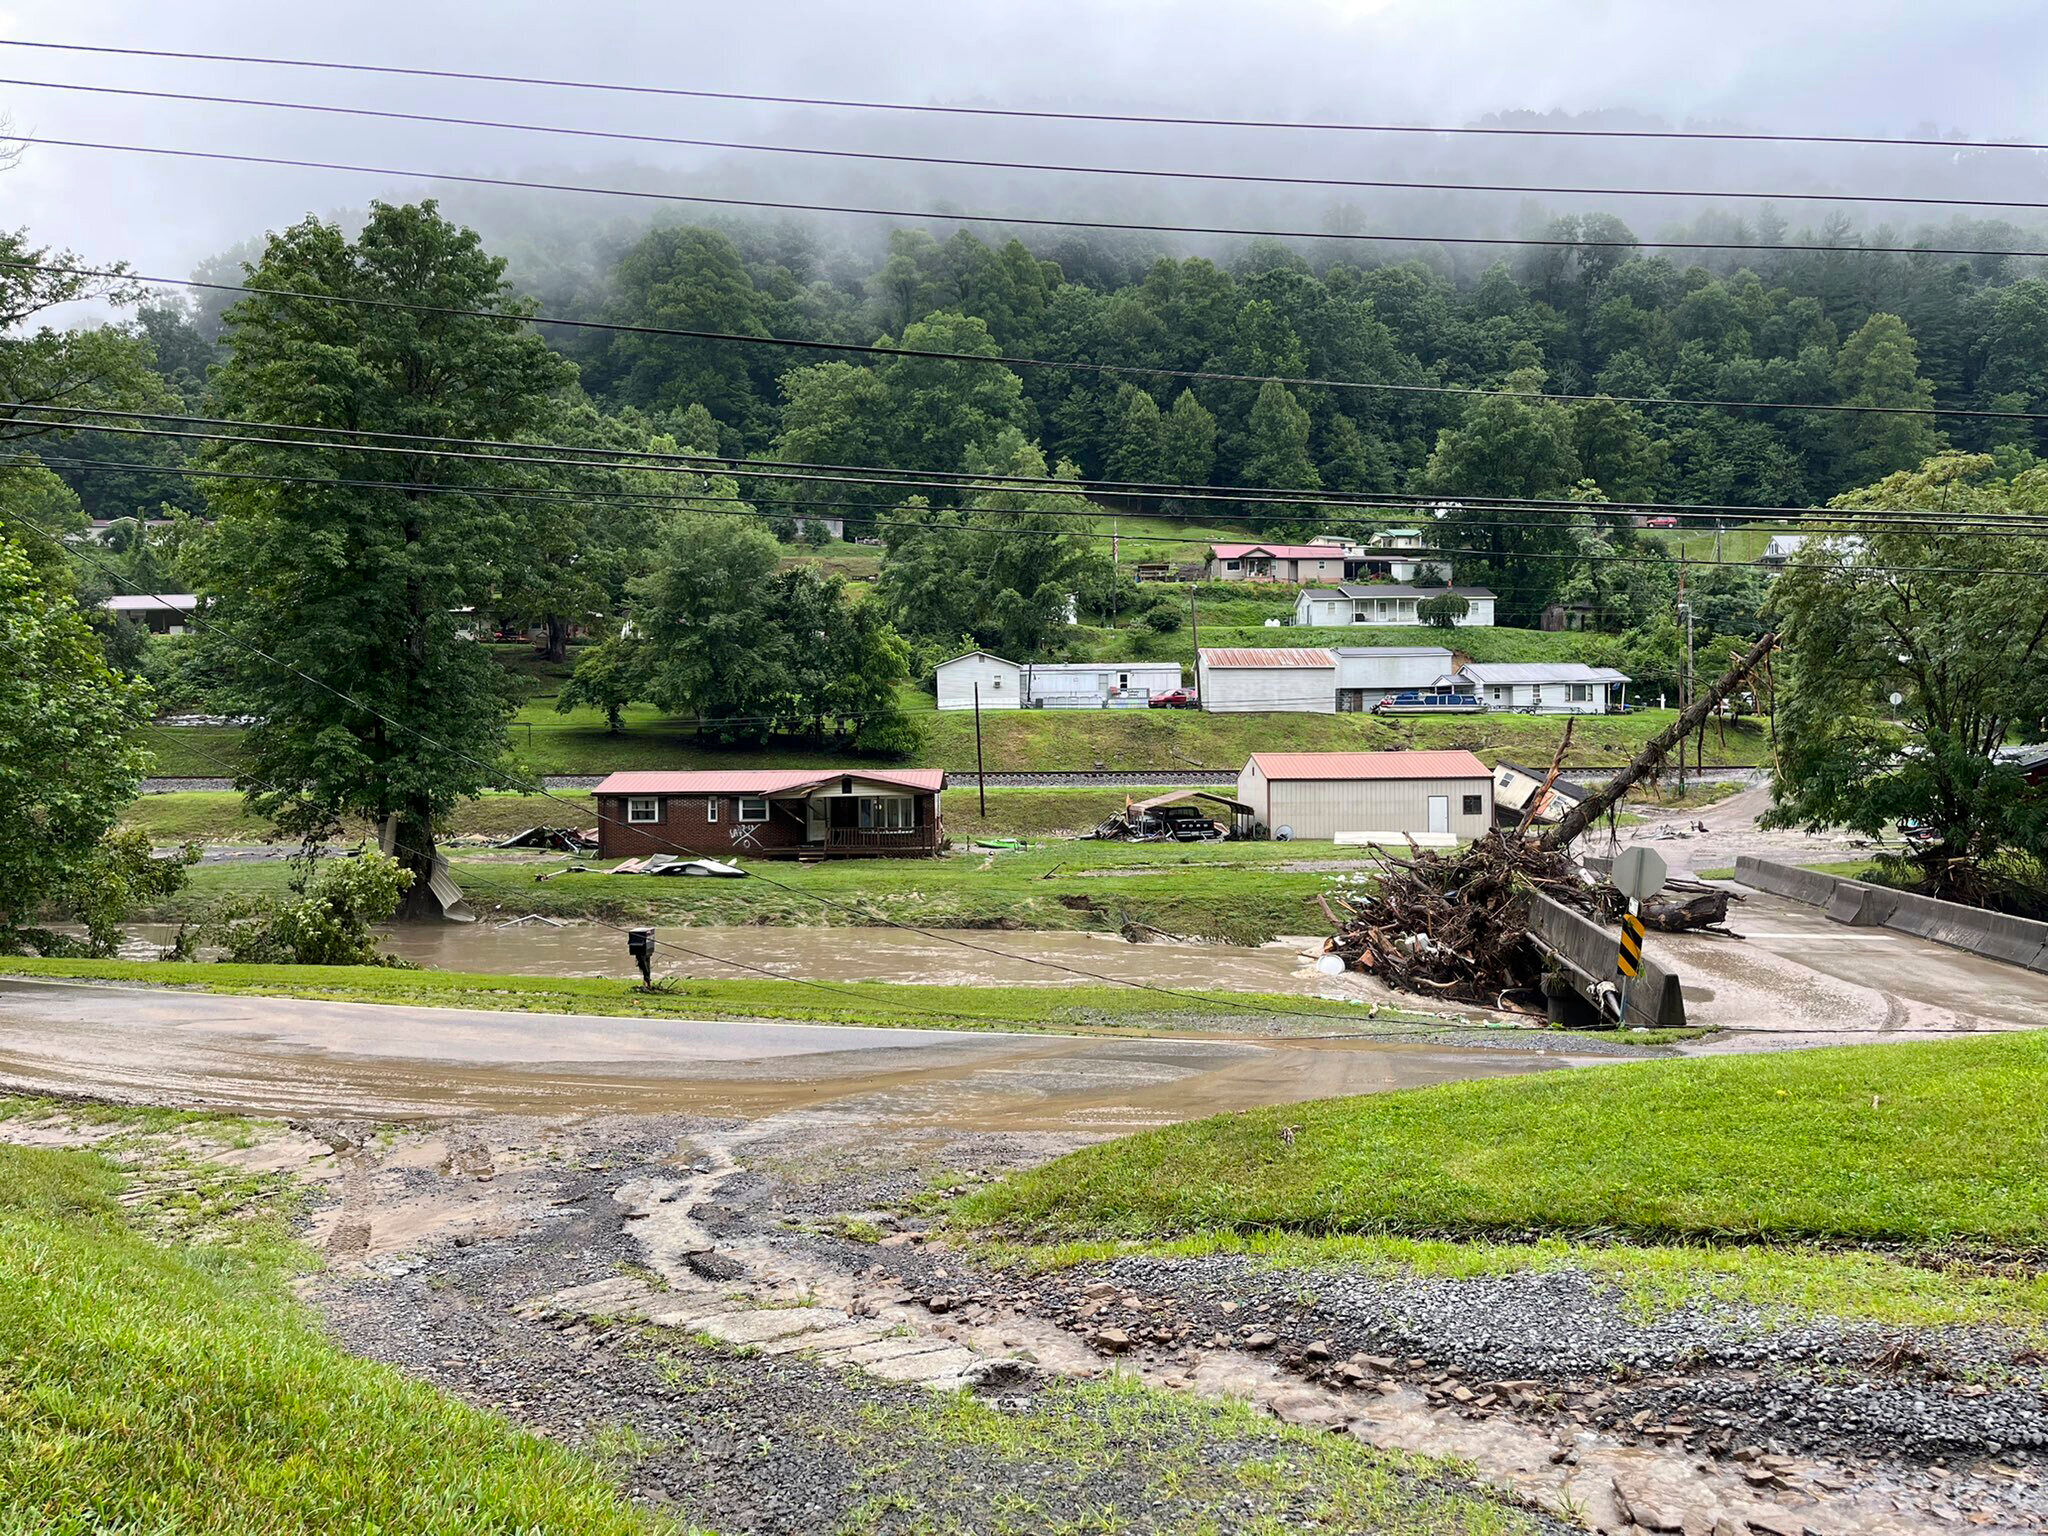 Buchanan County VA flooding: Over 100 homes damaged, 40 people missing